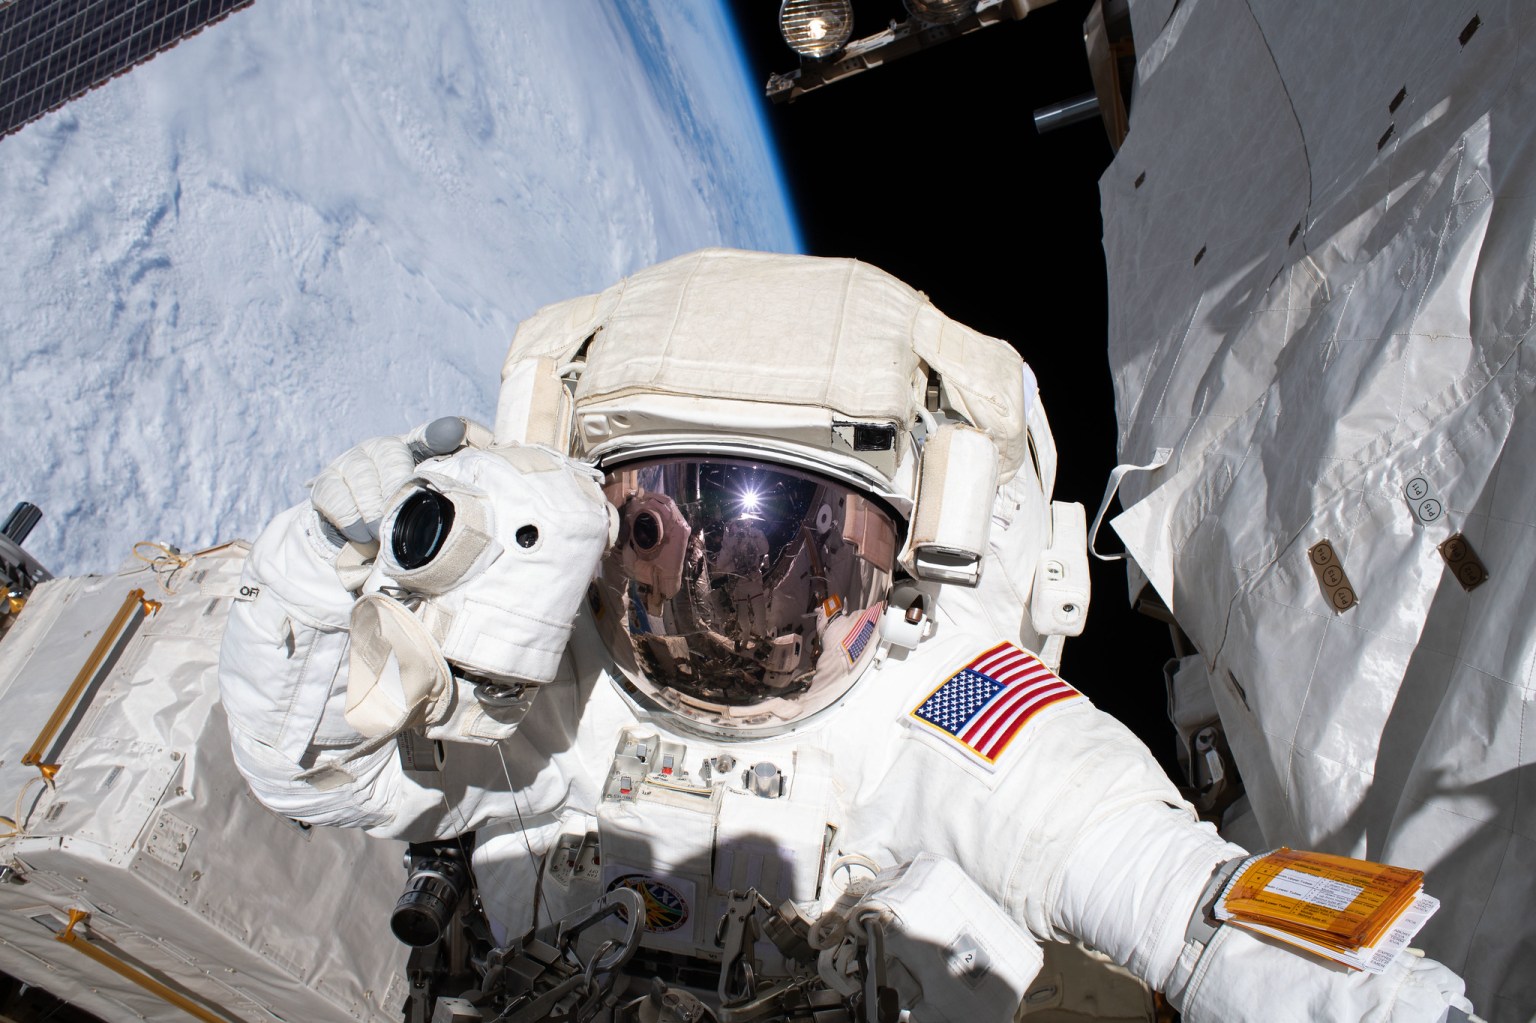  NASA astronaut and spacewalker Andrew Morgan prepares to take a photograph with a camera protected from the hazards of microgravity by shielding. 